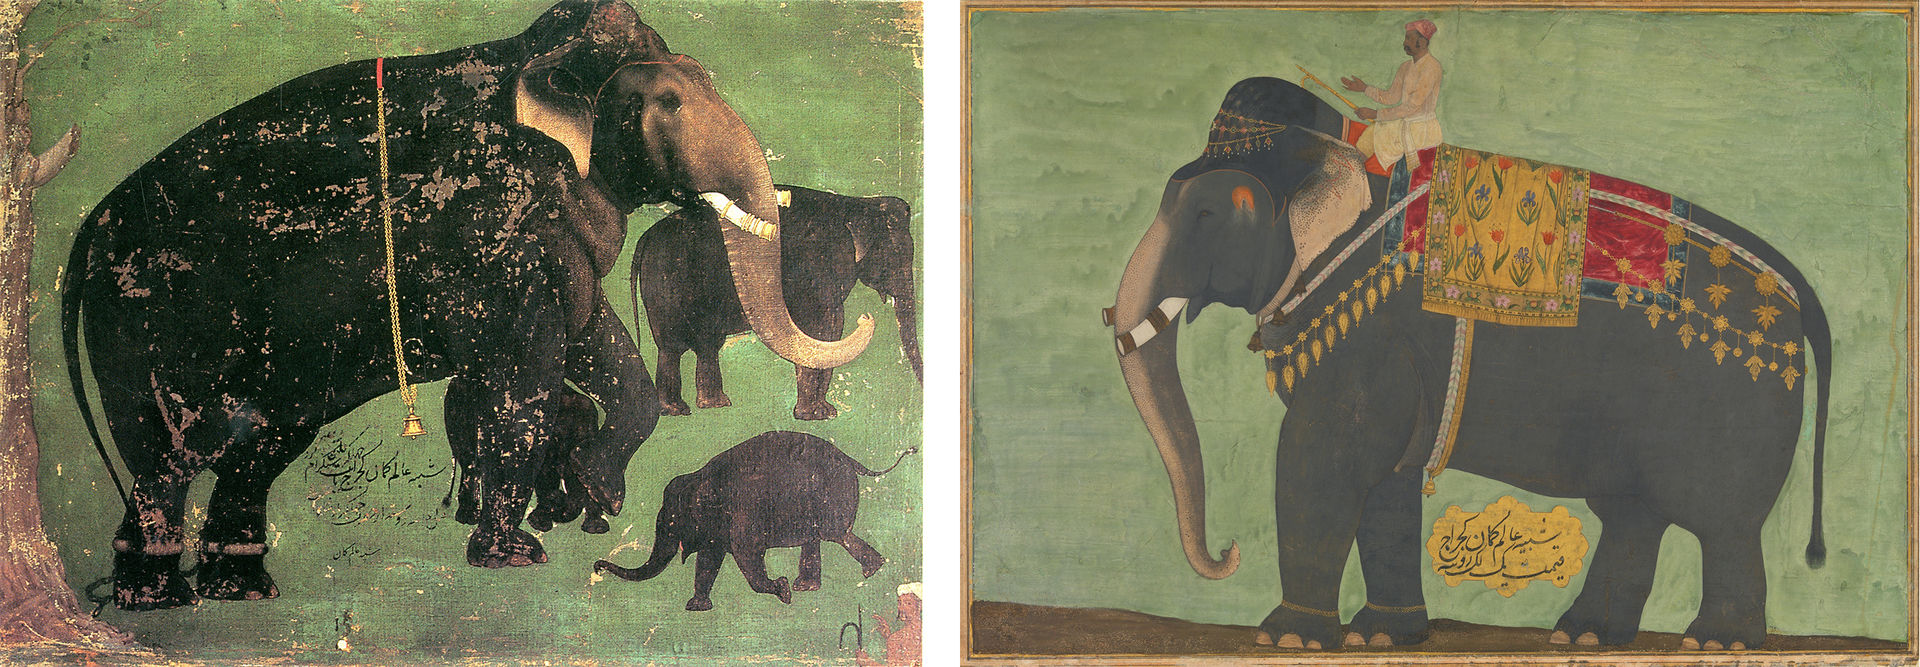 painting of an elephant with two smaller elephants on the left and painting of an elephant with a rider against a green background on the right